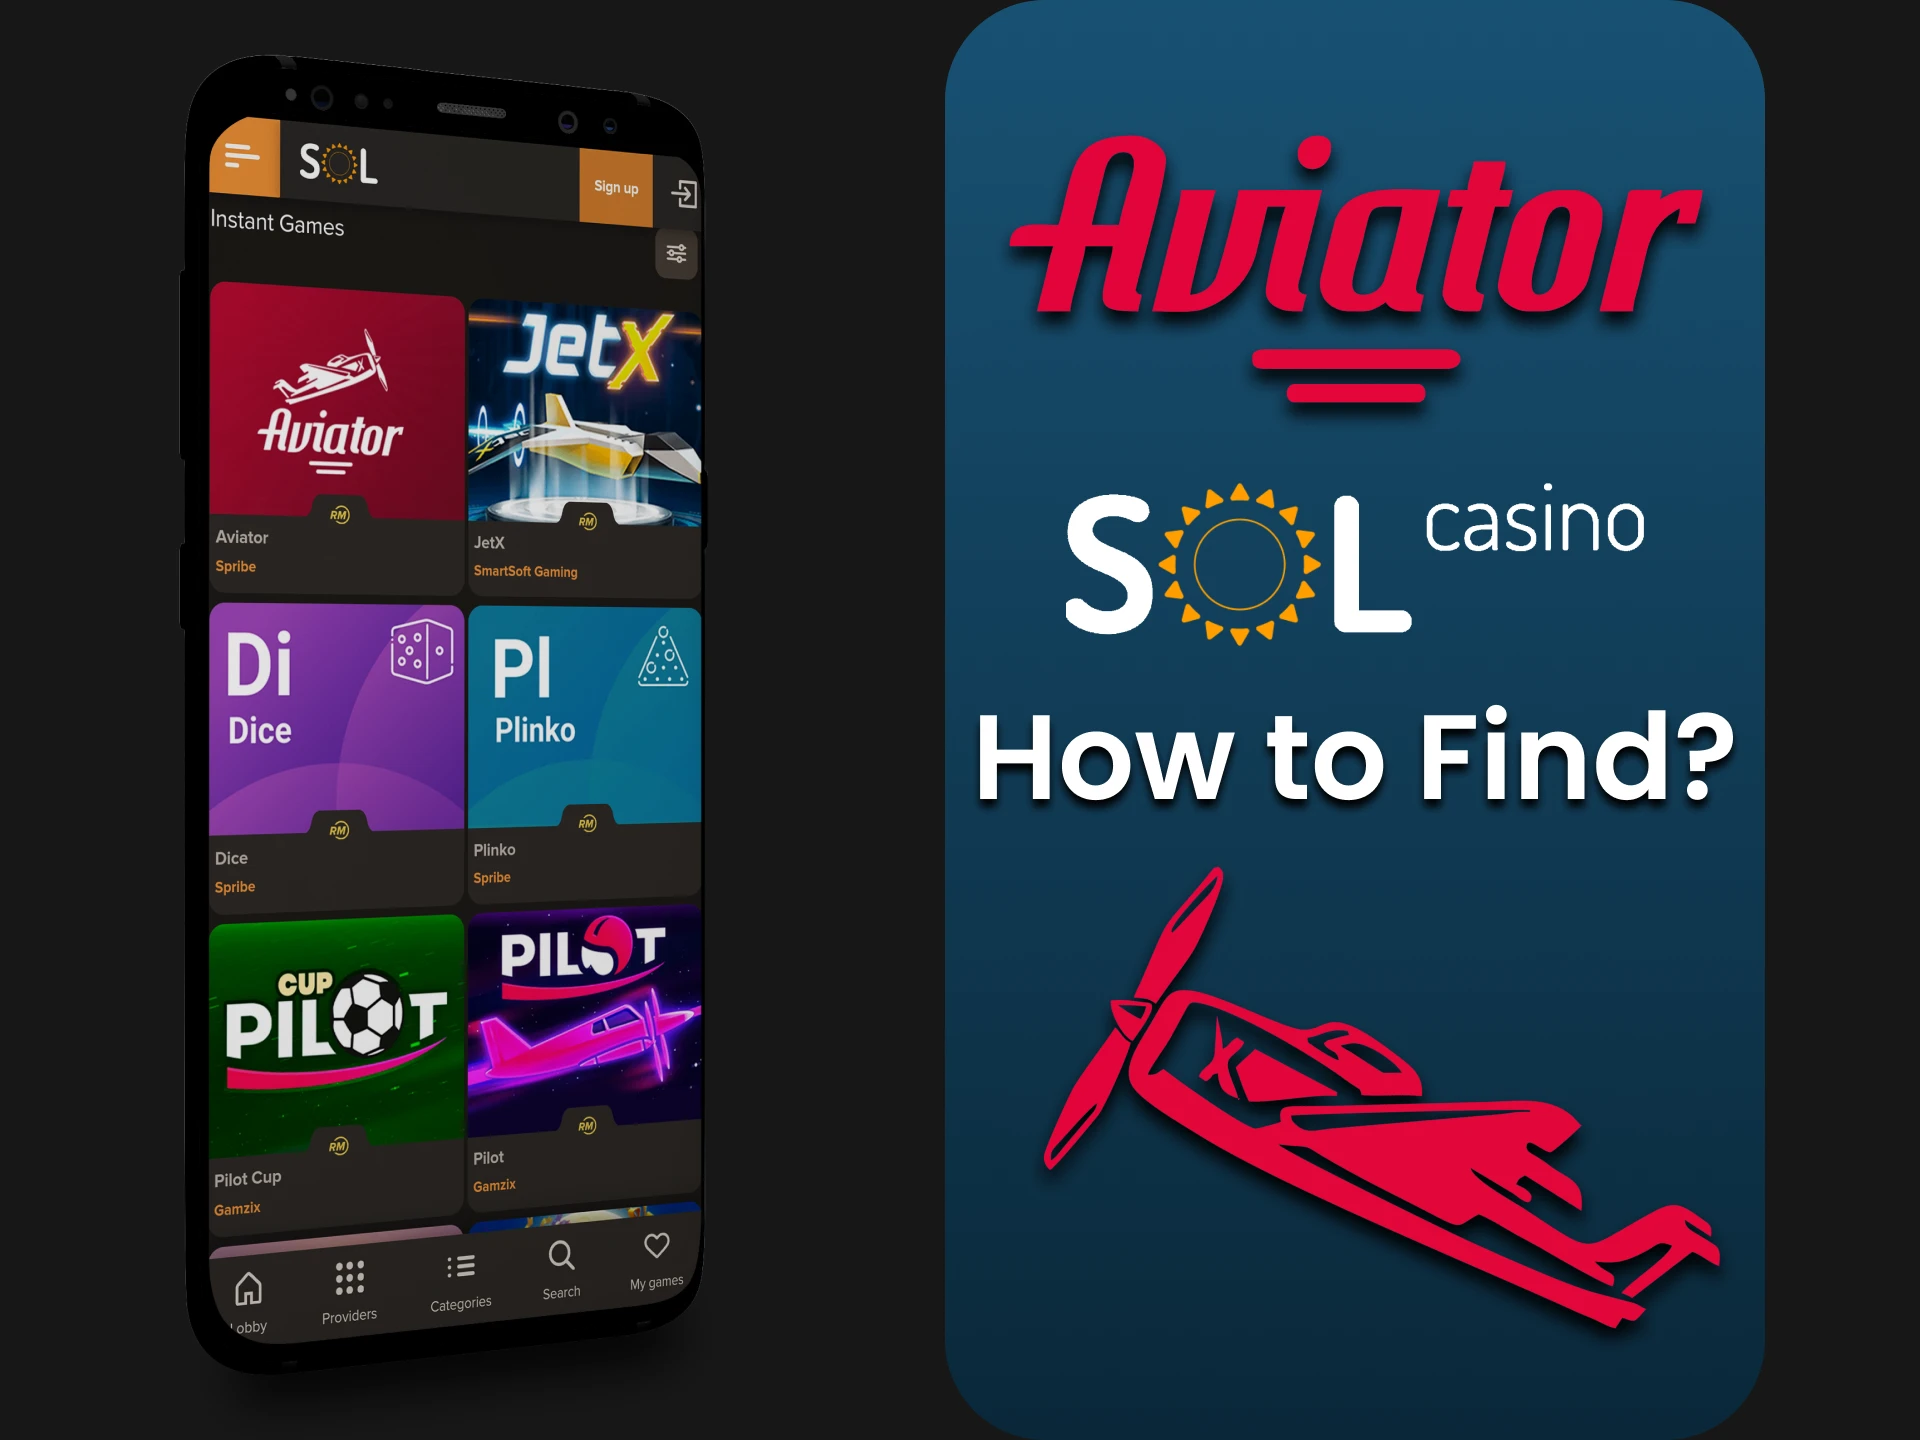 Go to the casino section of the Sol Casino app to play Aviator.